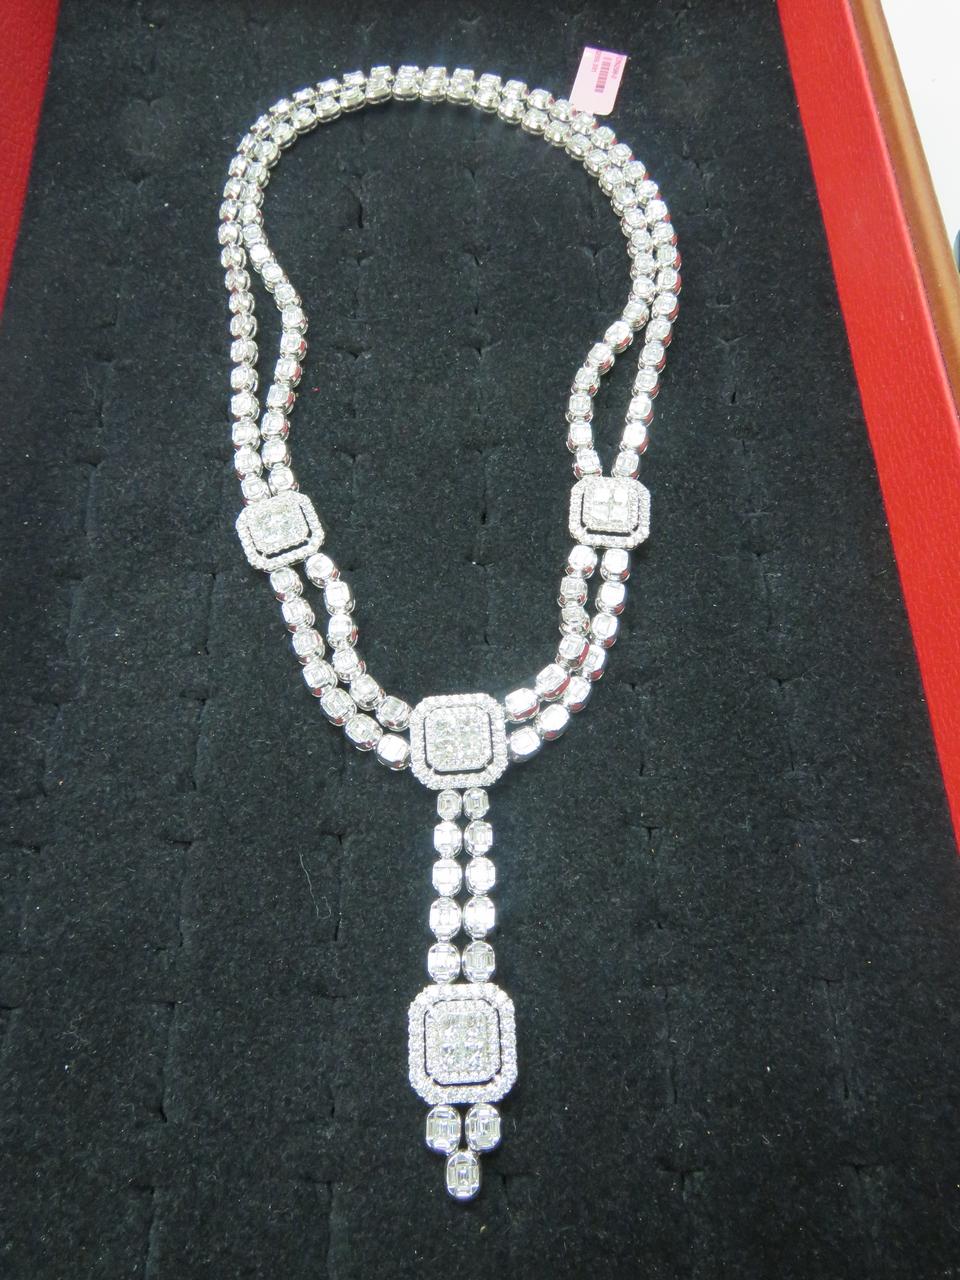 The Following Item we are offering is this Rare Important Radiant 18KT Gold Gorgeous Glittering and Sparkling Magnificent Fancy Diamond Necklace. Necklace contains approx 30CTS of Beautiful Glittering Diamonds all set in 18KT Gold!!! Stones are Very